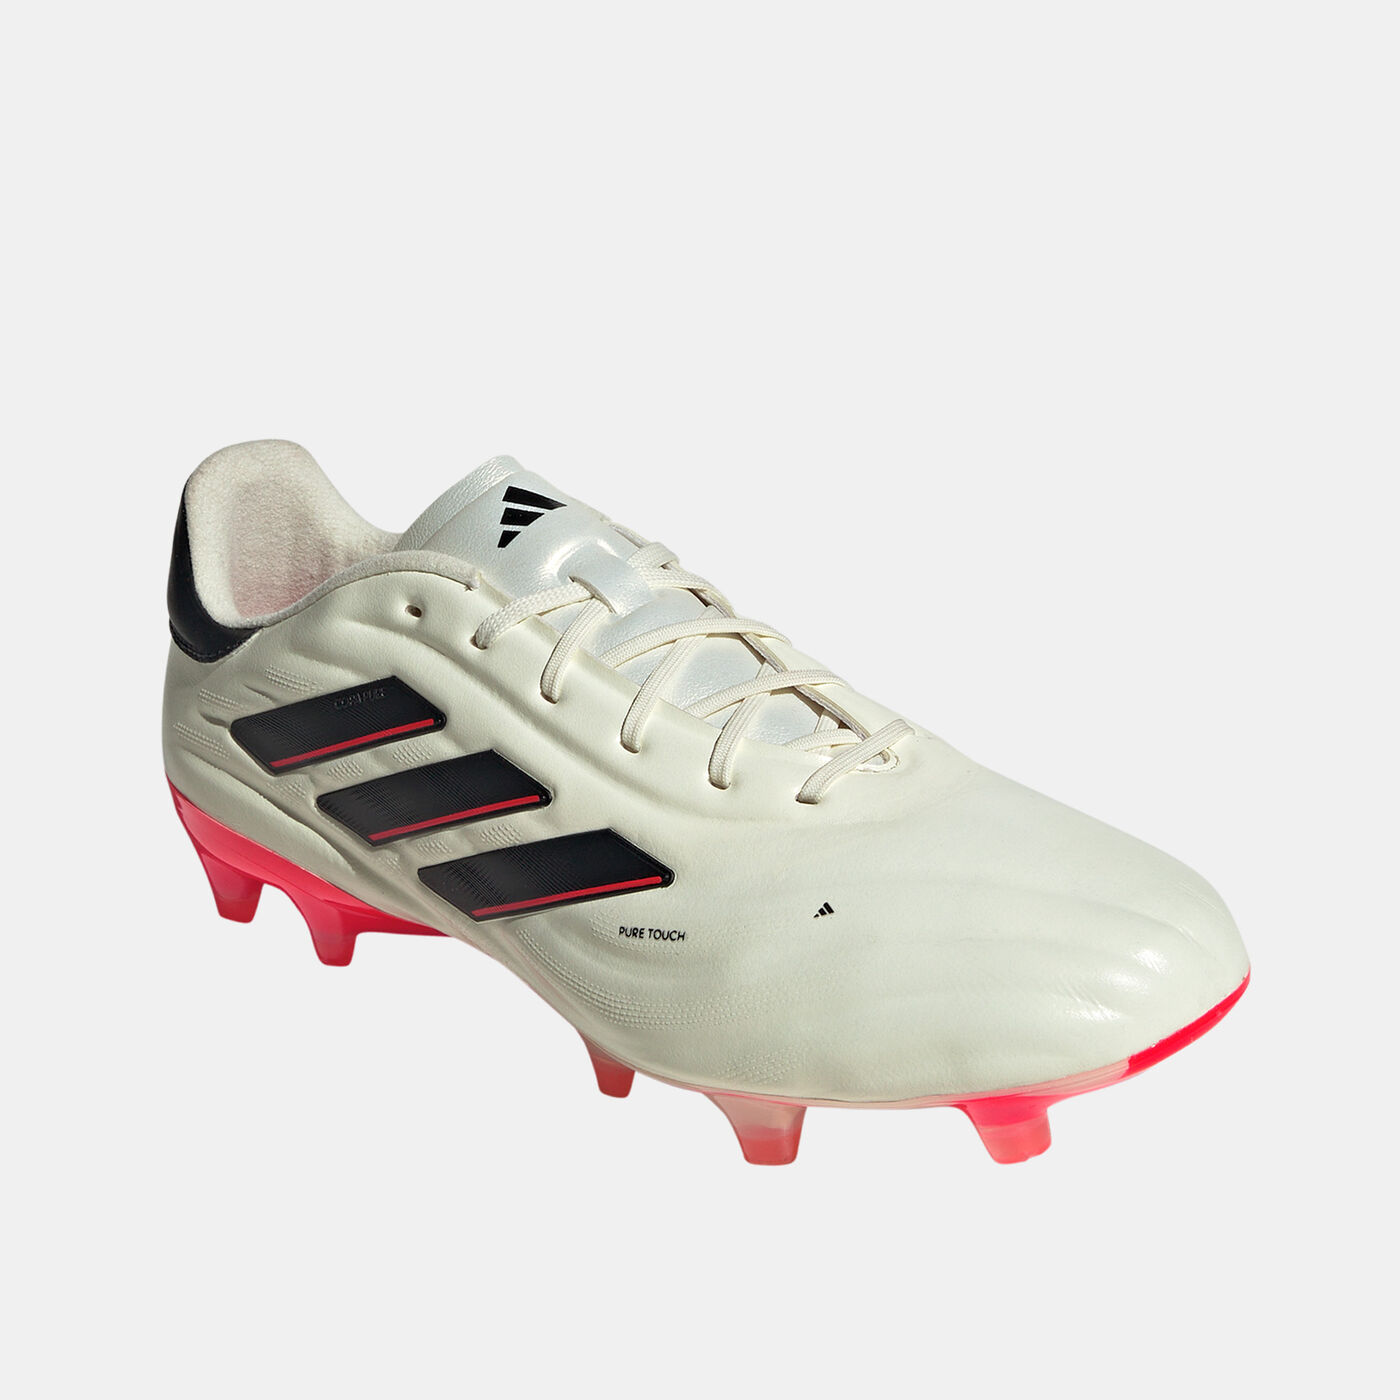 Men's Copa Pure 2 Elite Firm-Ground Football Shoes